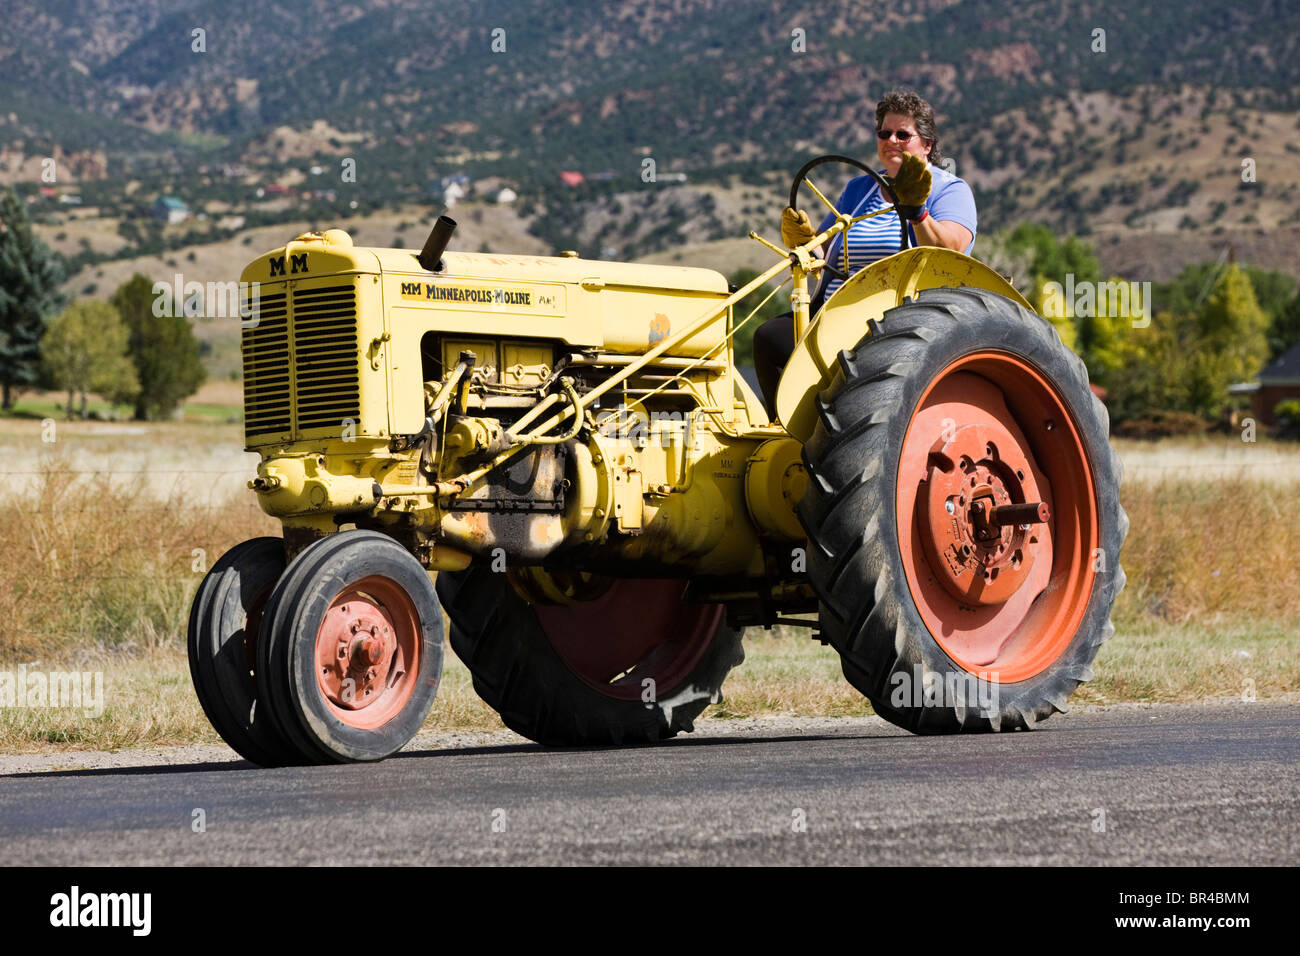 Wedding procession, rancher riding on antique tractor from the church to the reception, Salida, Colorado, USA Stock Photo